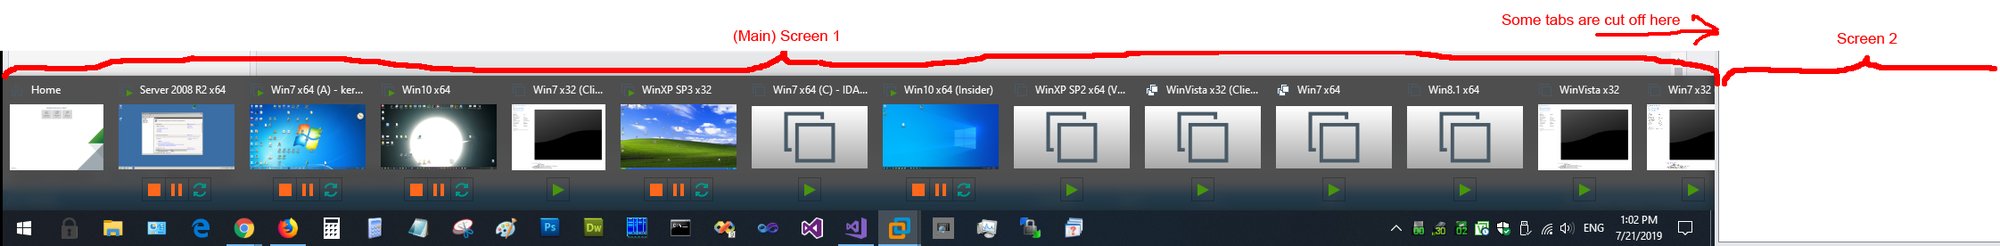 Taskbar popup tabs don't fit the screen -- how to scroll them? tuMnQRM.png